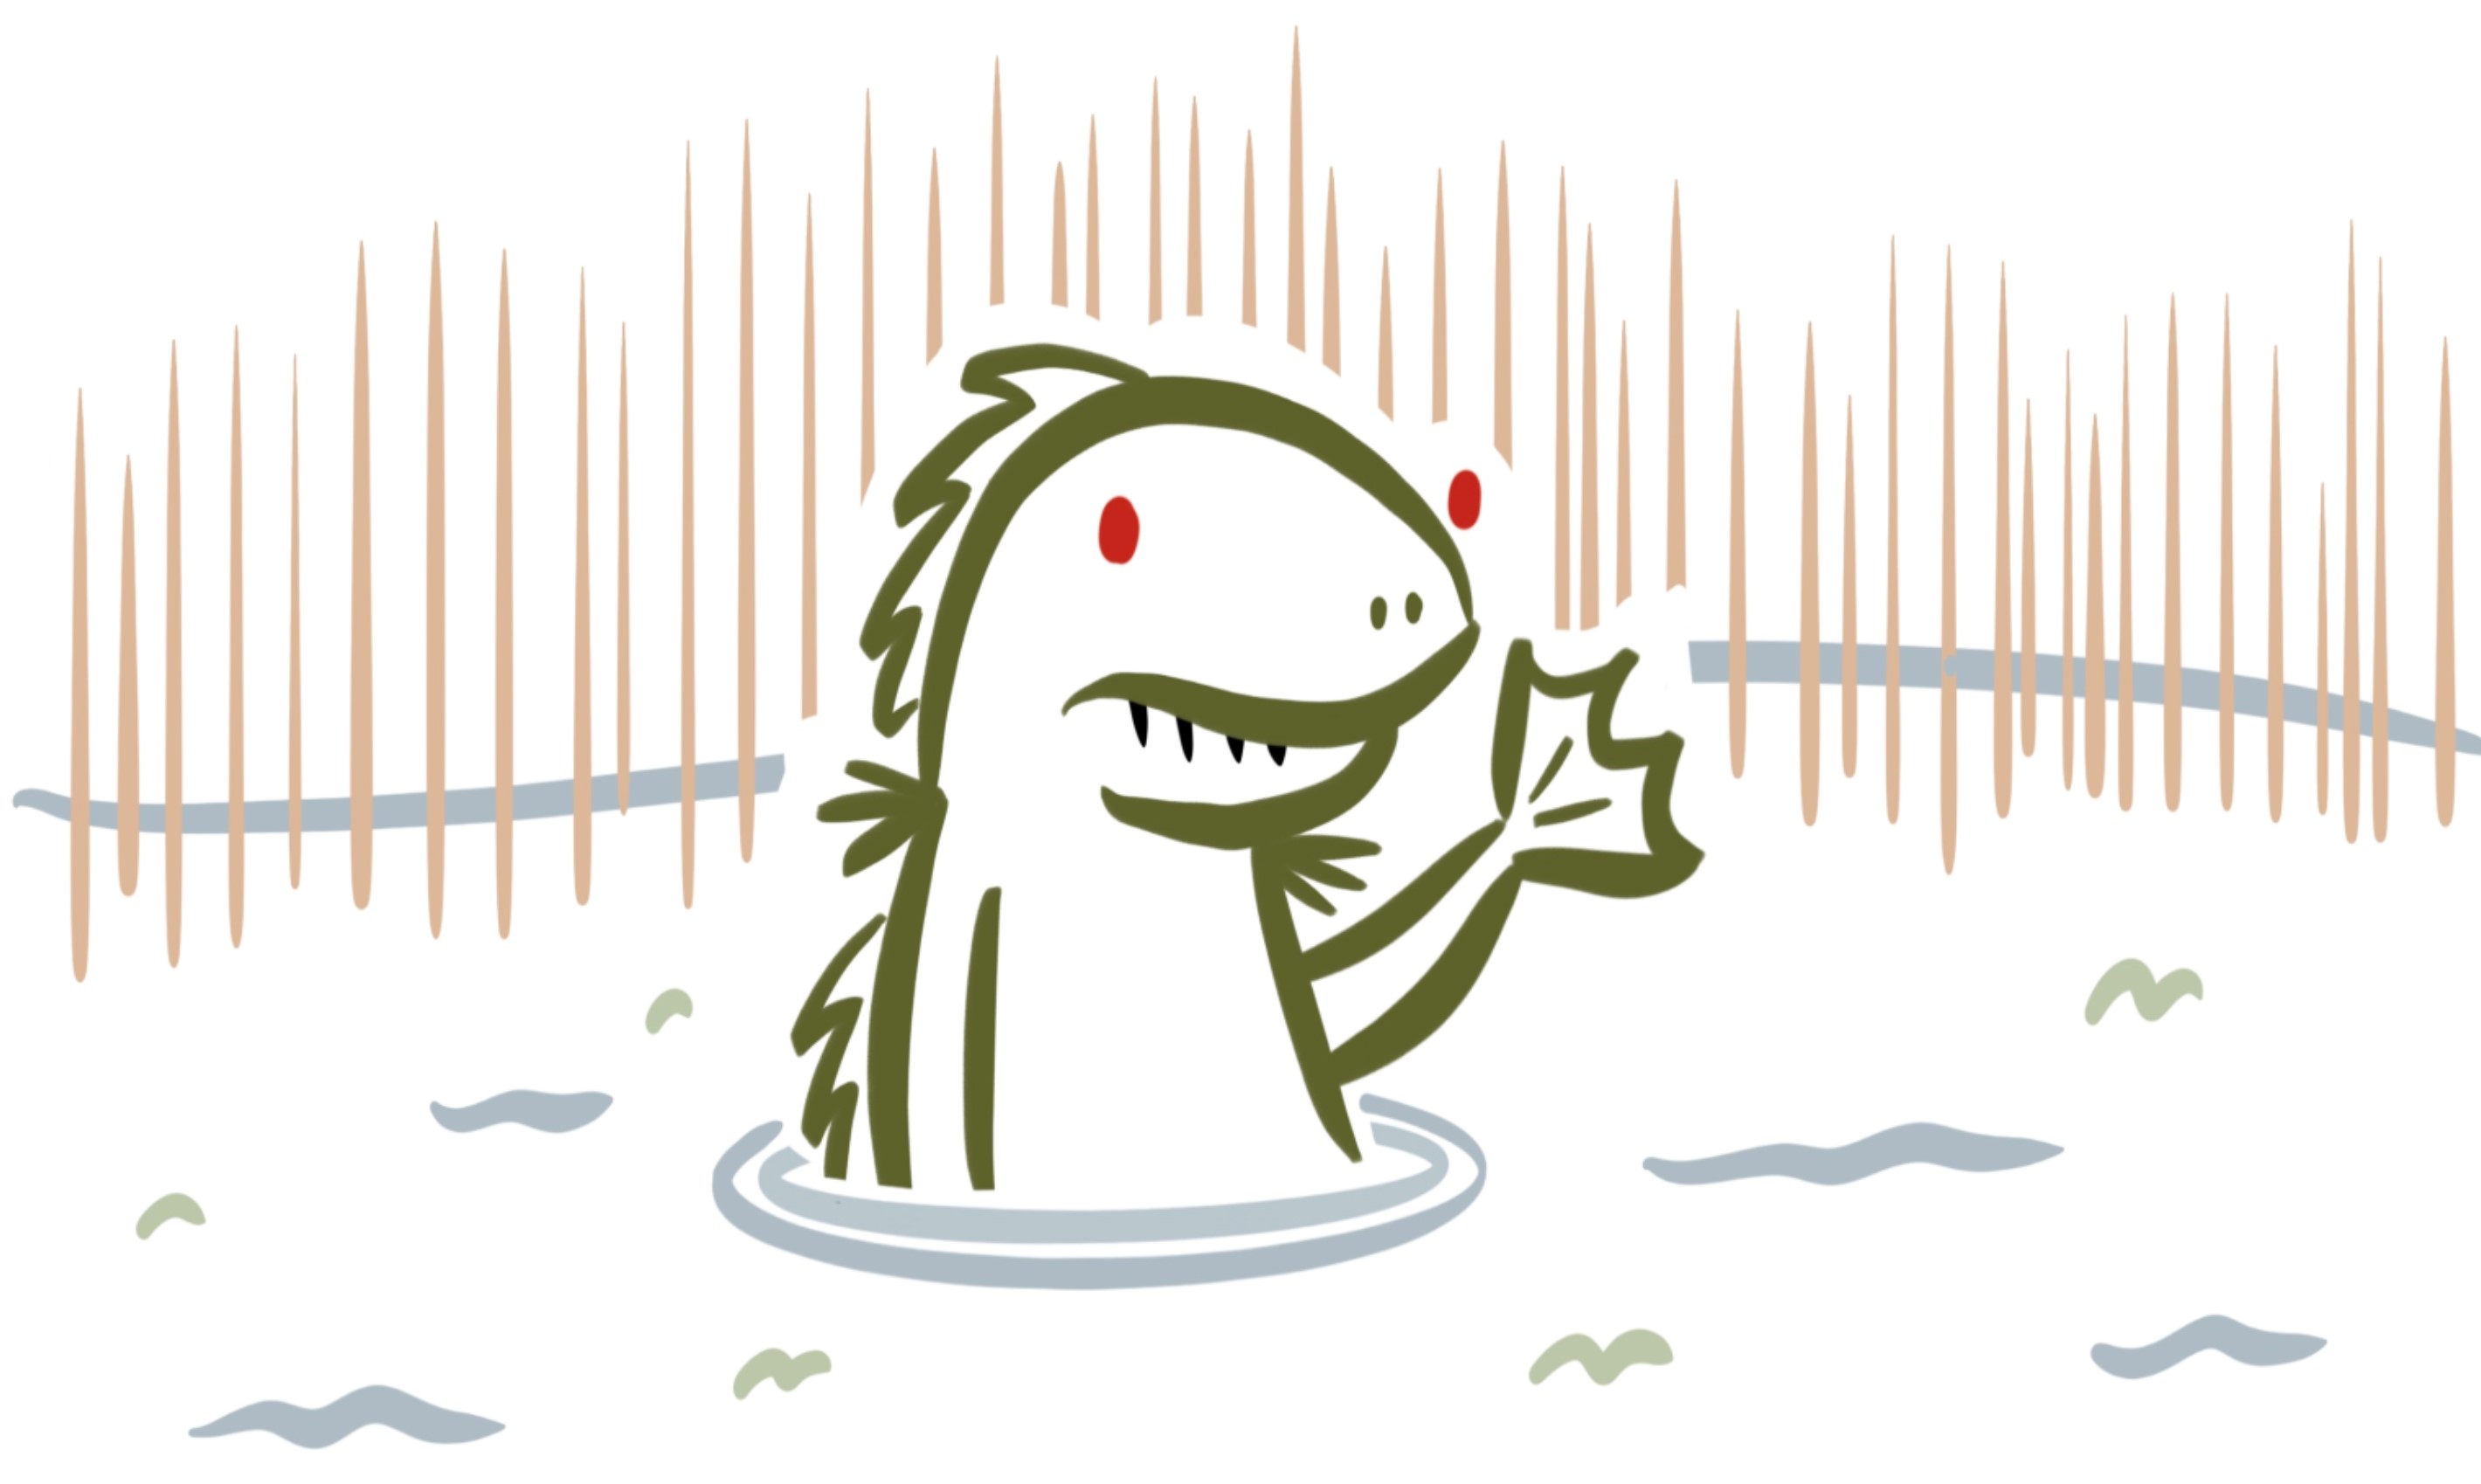 Drawing of a lizard-like creature in a swamp.